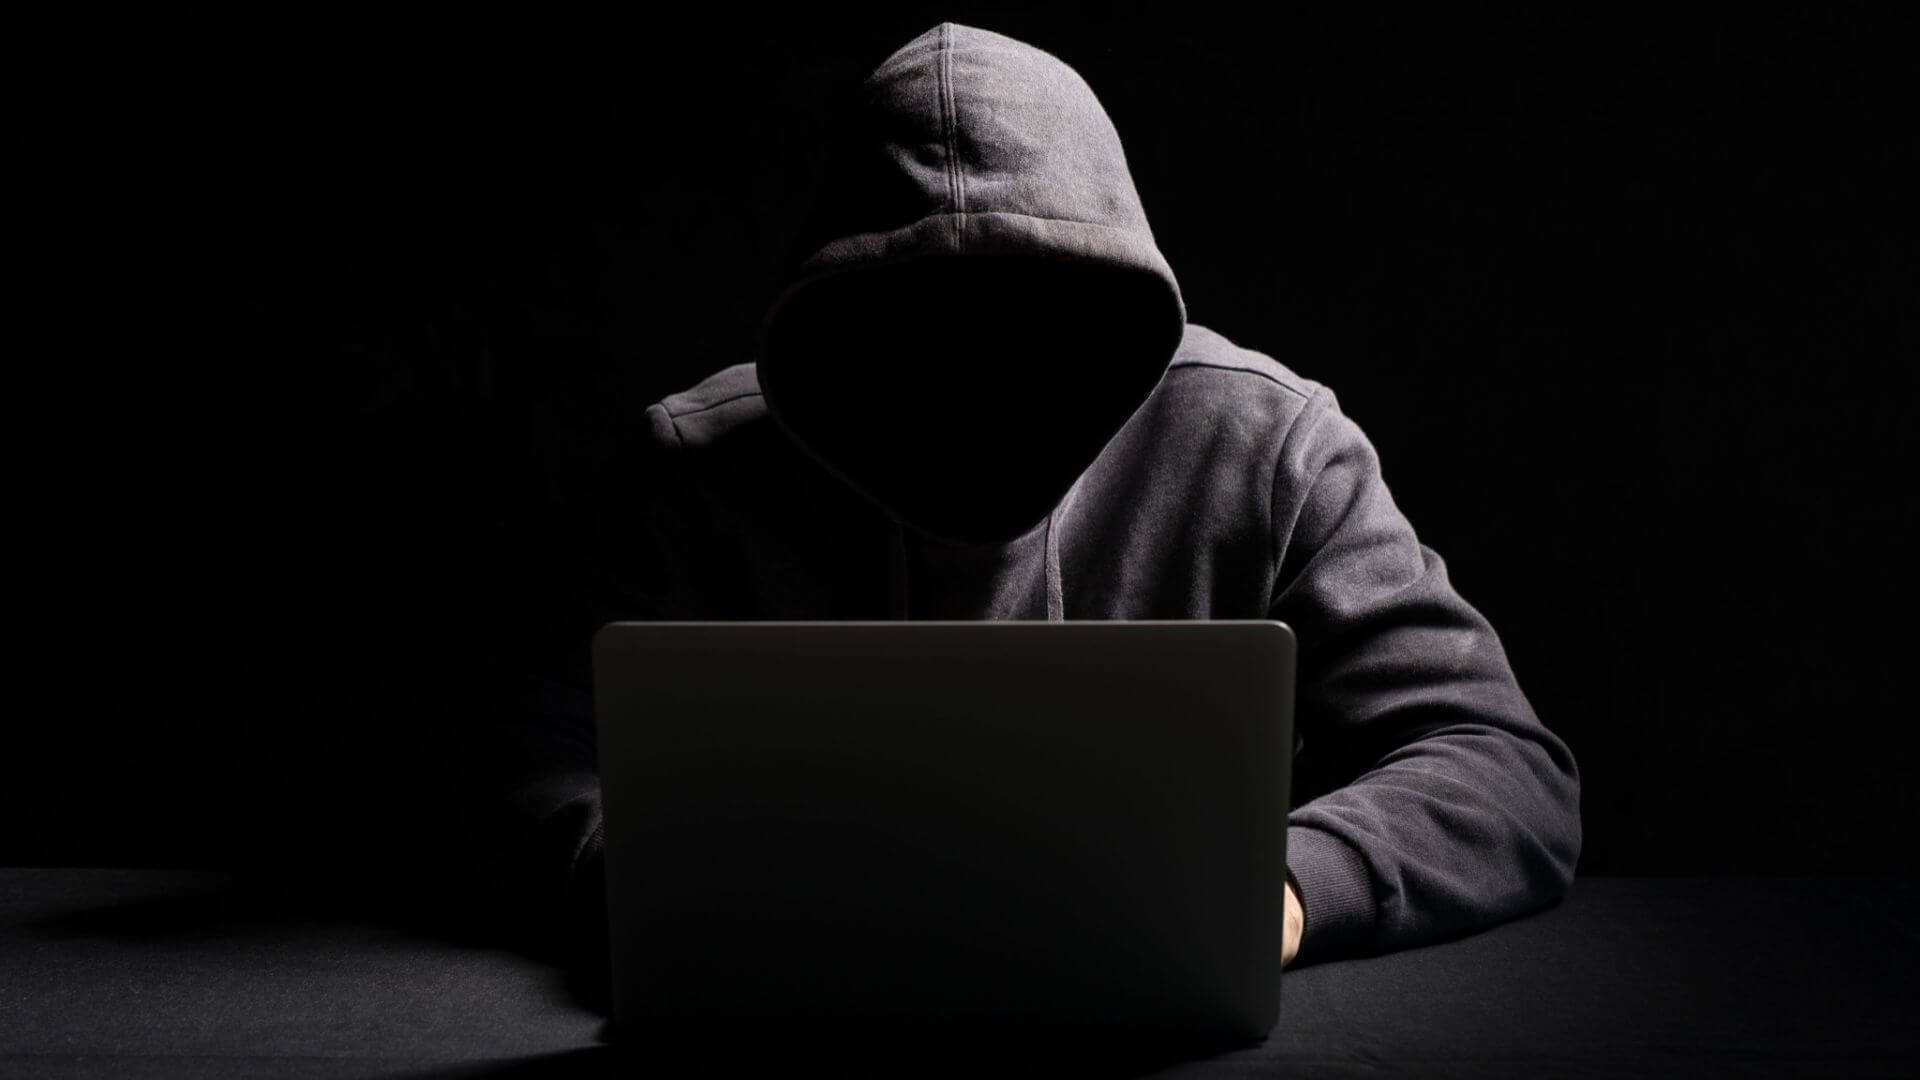 person committing online defamation of another in dark room